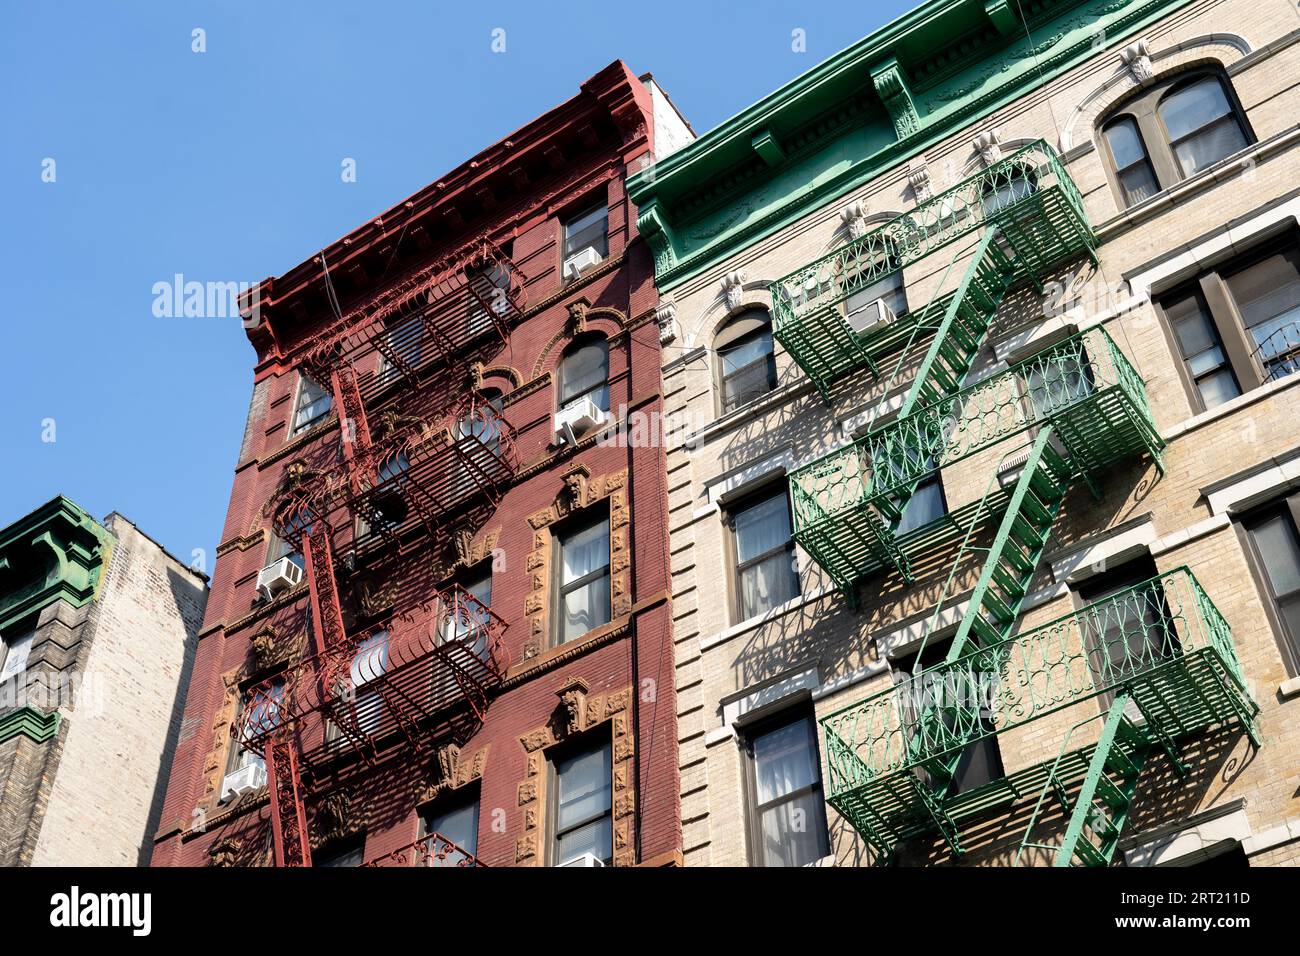 New York, United States of America, September 22, 2019: Residential Buildings with typical fire escapes in Manhatten Stock Photo